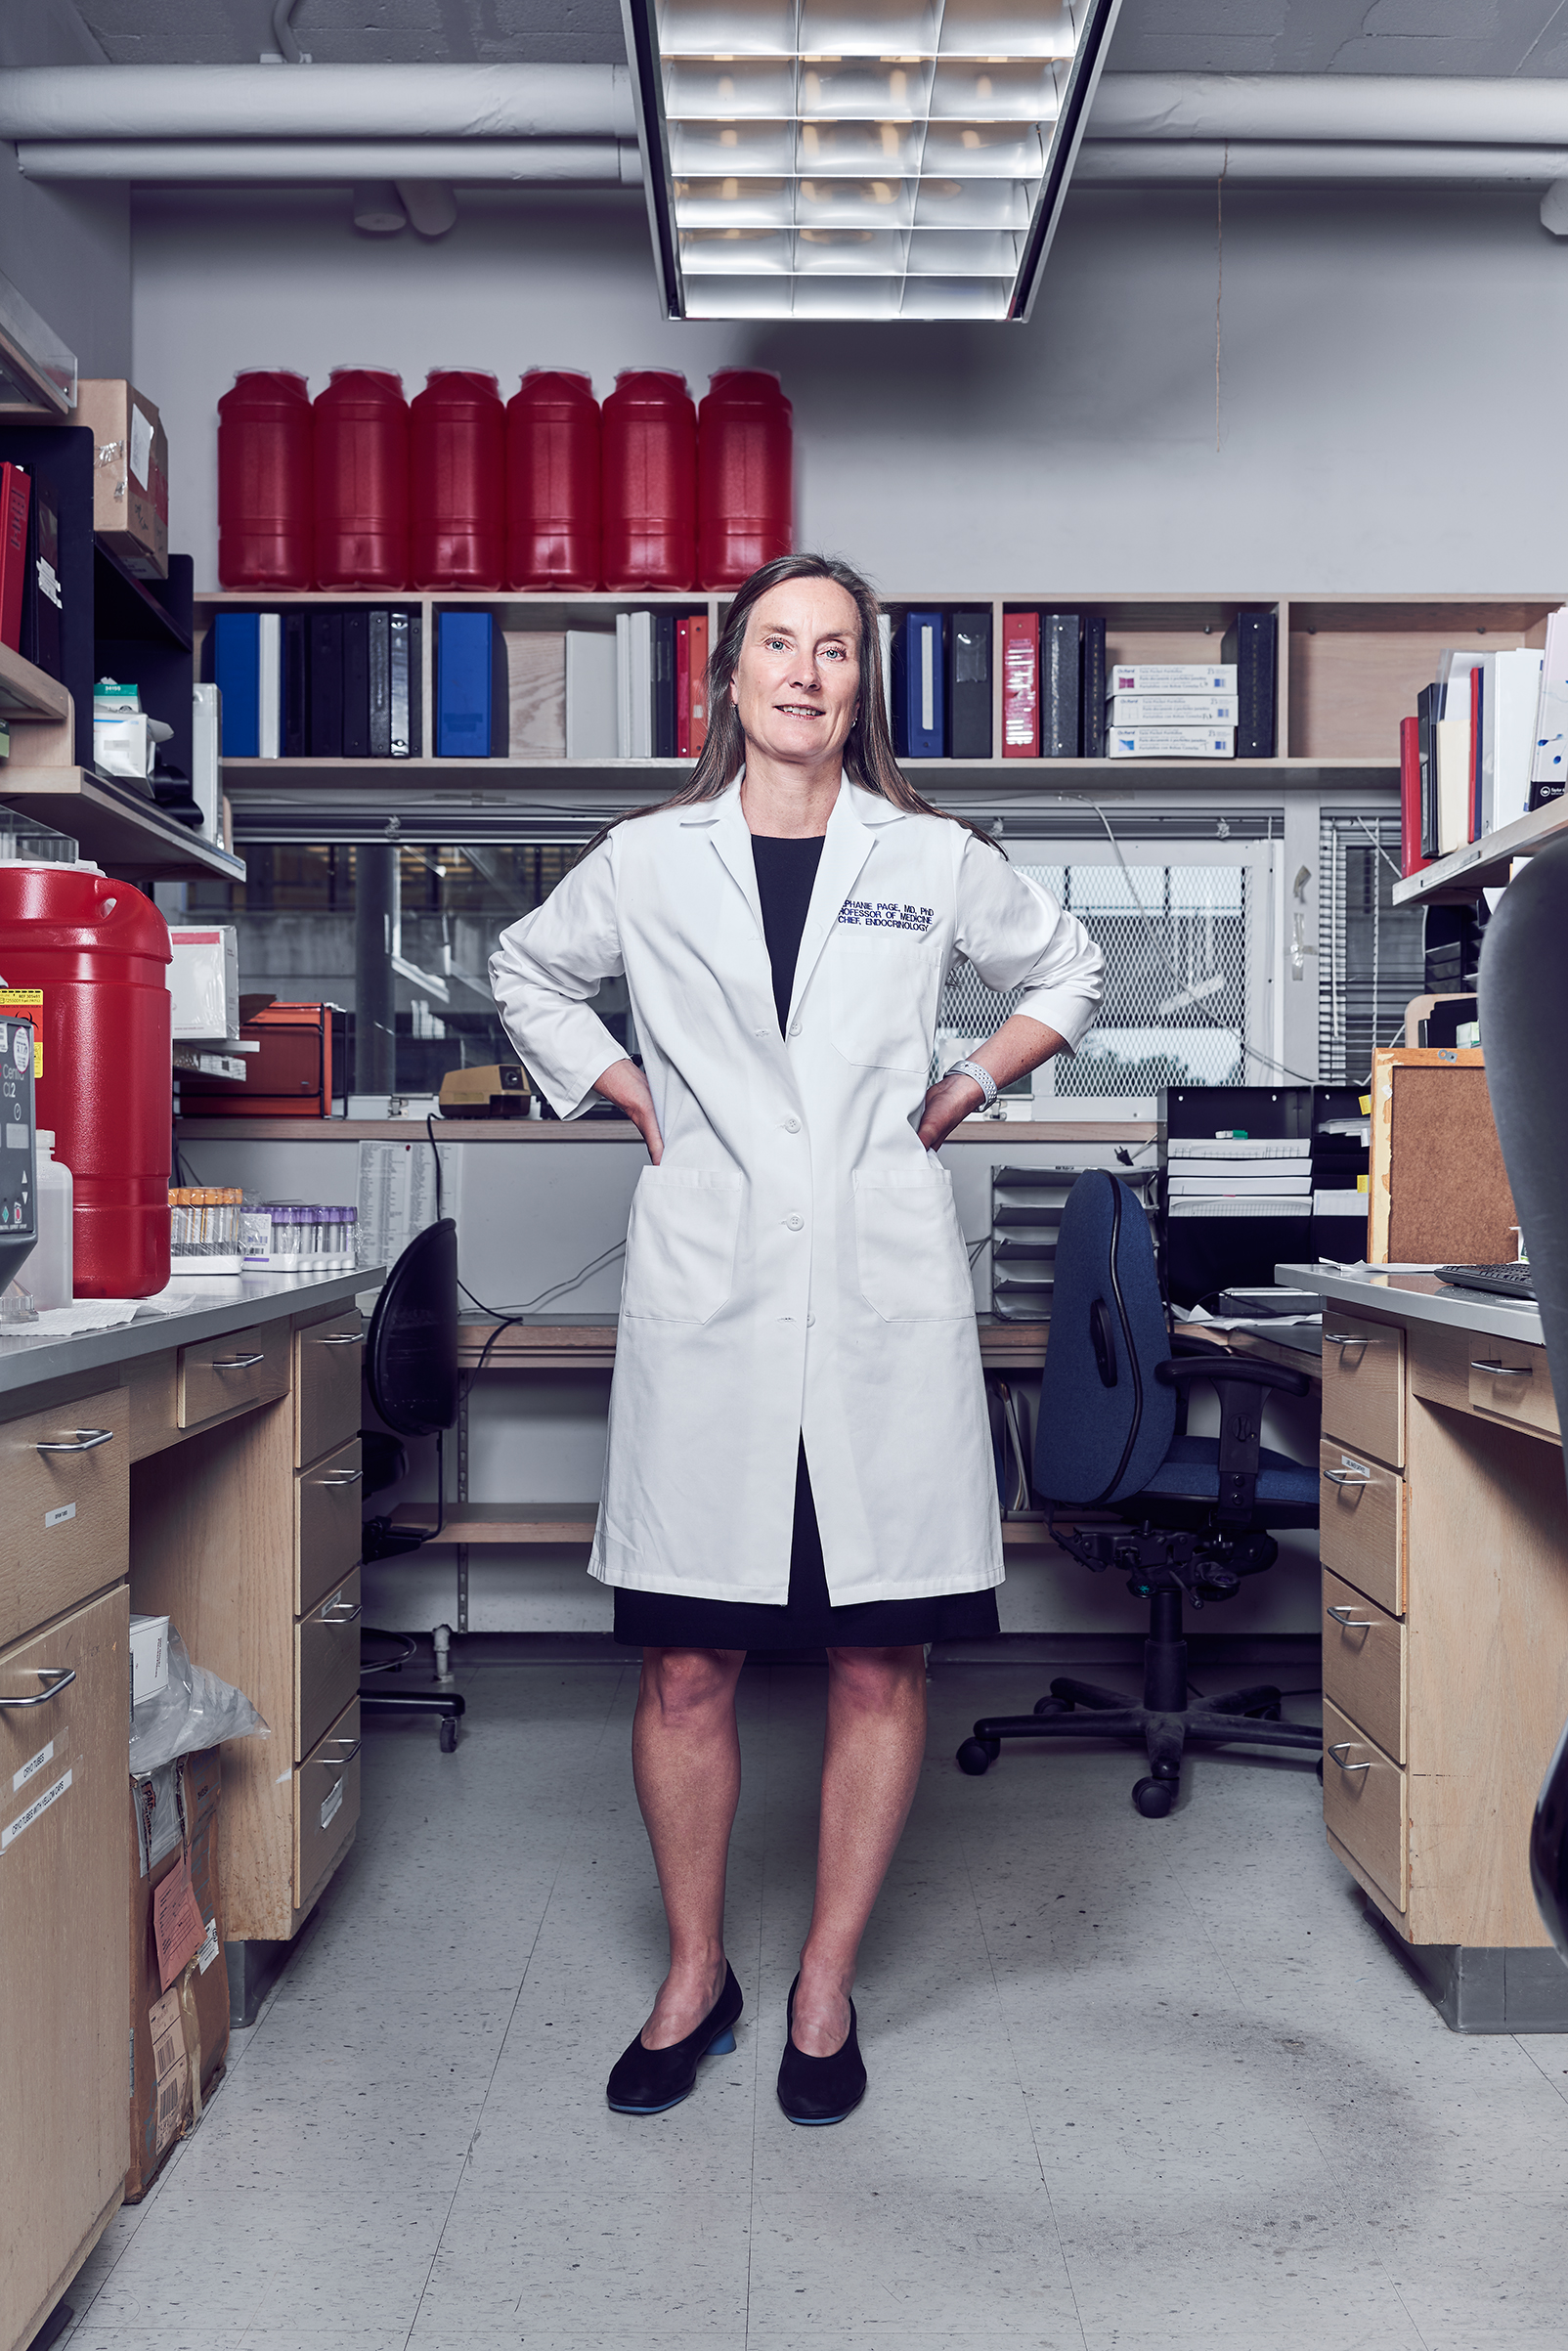 Dr. Stephanie Page of the University of Washington School of Medicine is co-leading clinical trials of male contraceptive options, including a pill and a gel method (Ian Allen for TIME)